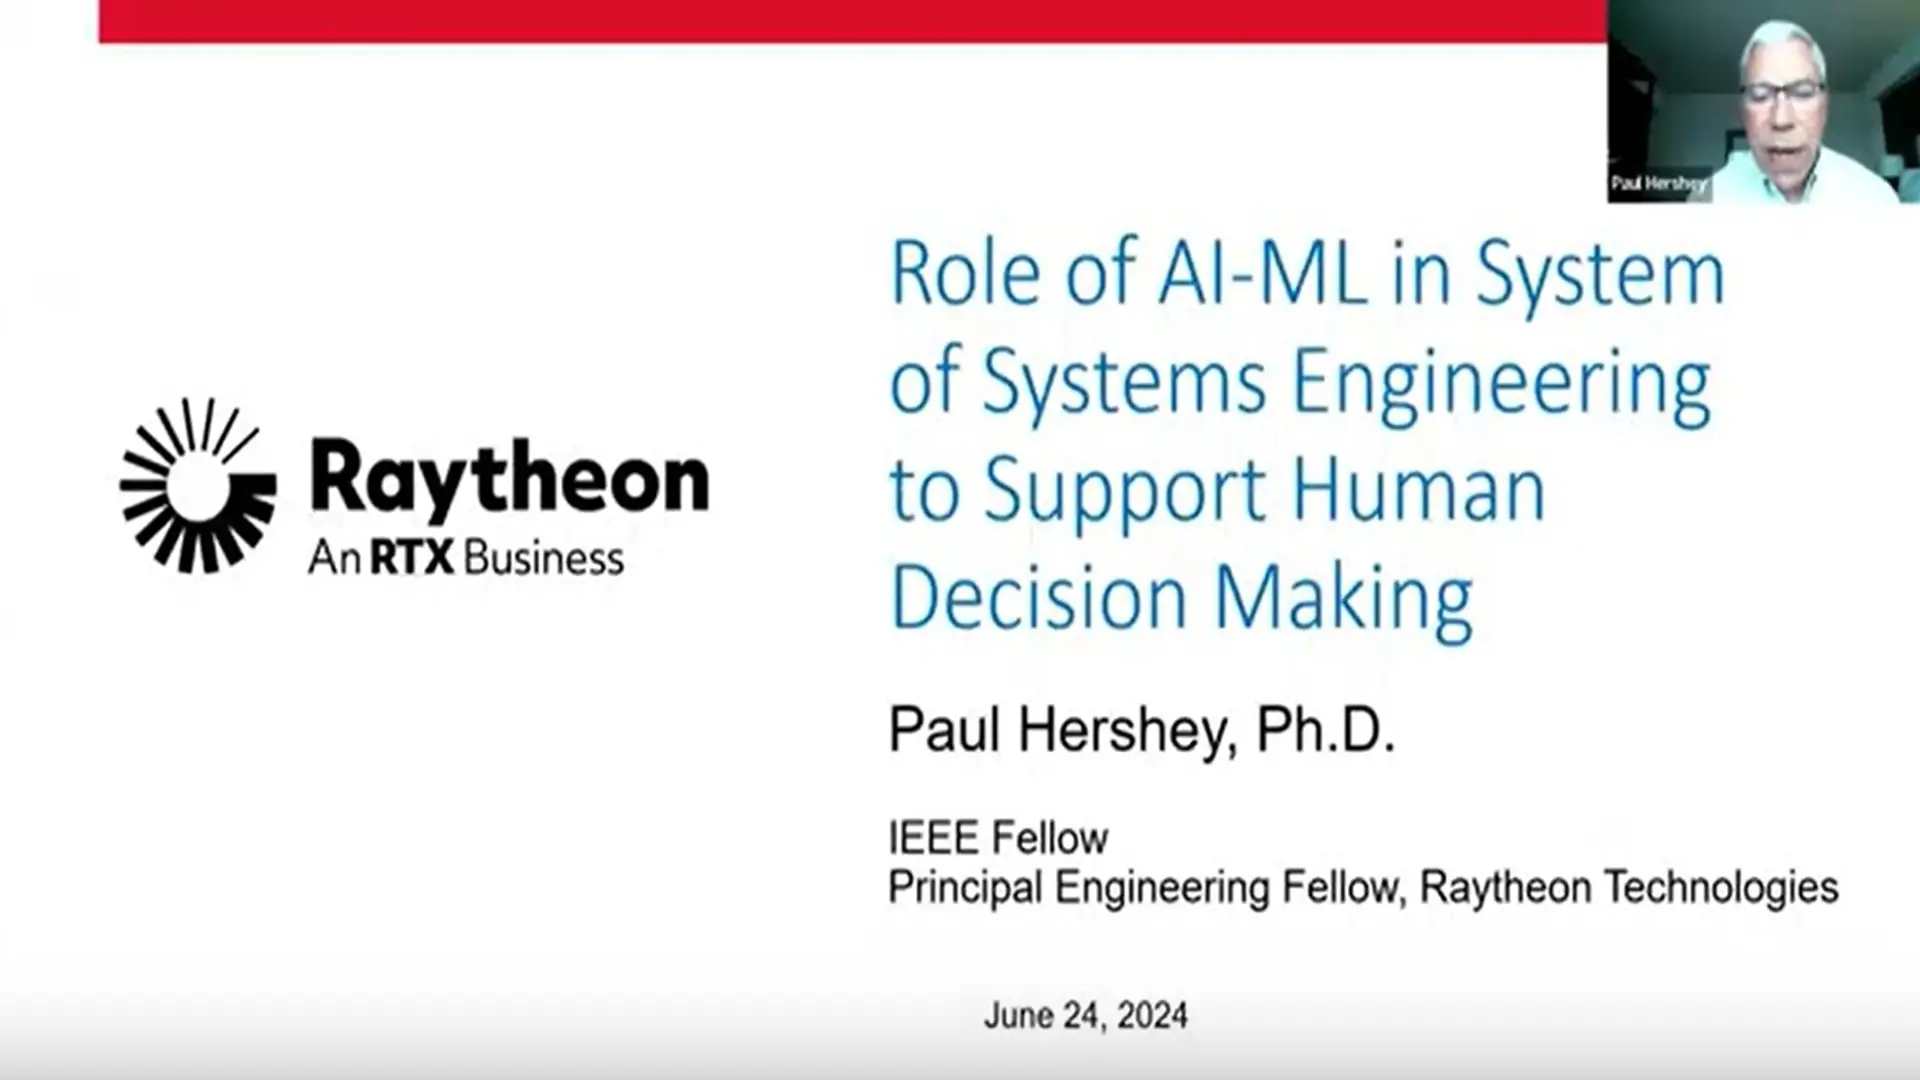 Role of AI/ML in Systems Engineering to Support Human Decision Making